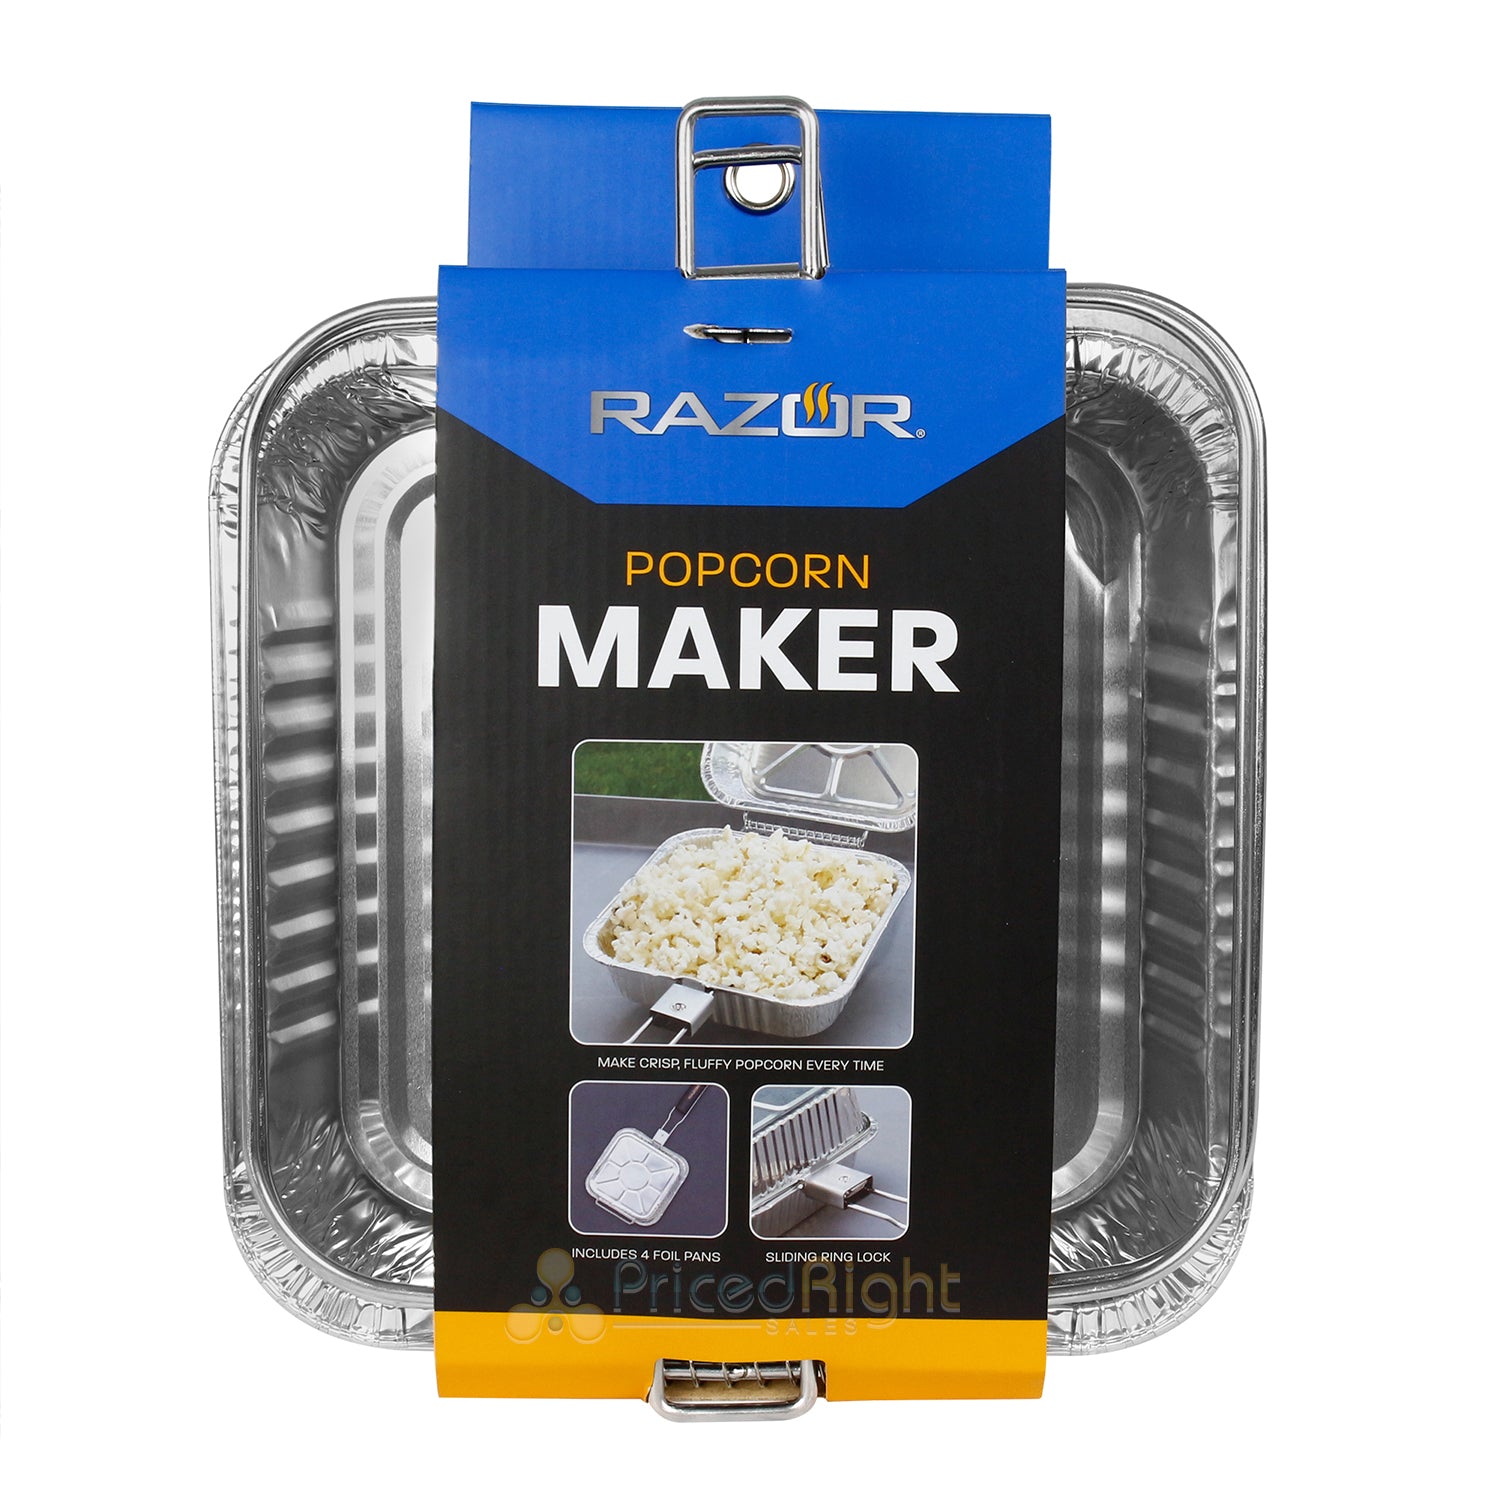 Razor Popcorn Maker With Four Aluminum Foil Pans Wooden Handle And Ring Lock